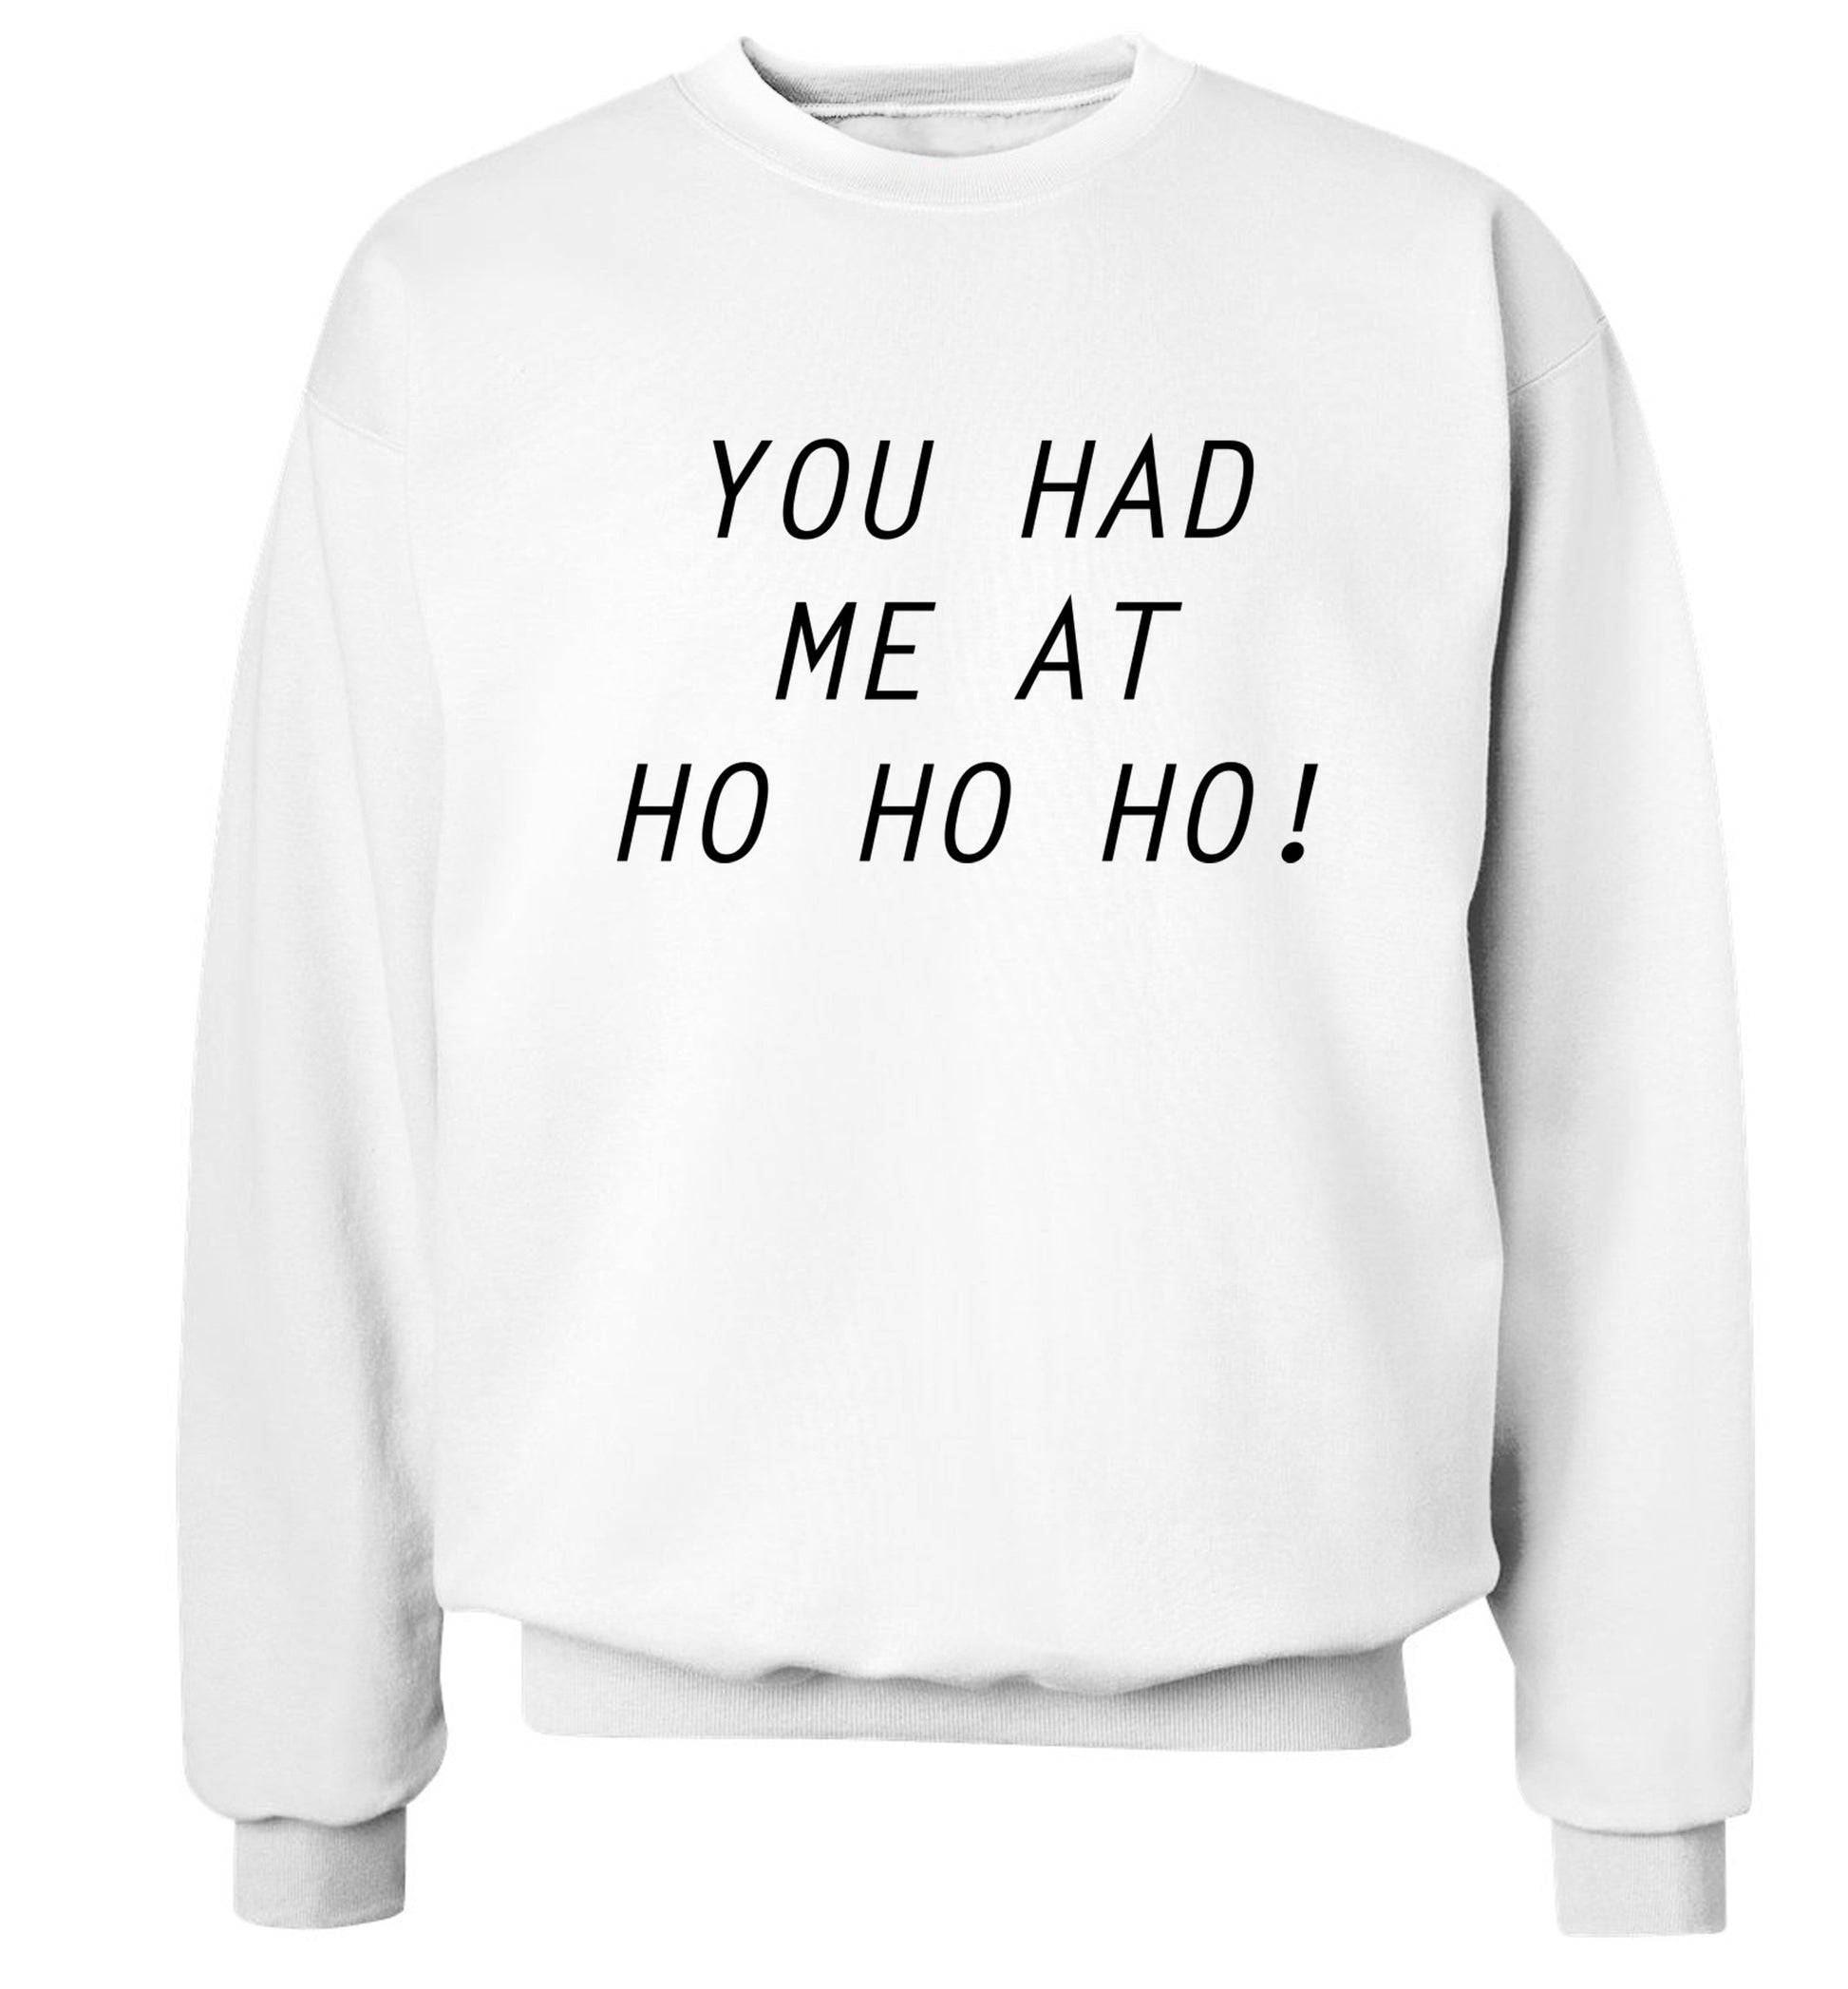 You had me at ho ho ho Adult's unisex white Sweater 2XL